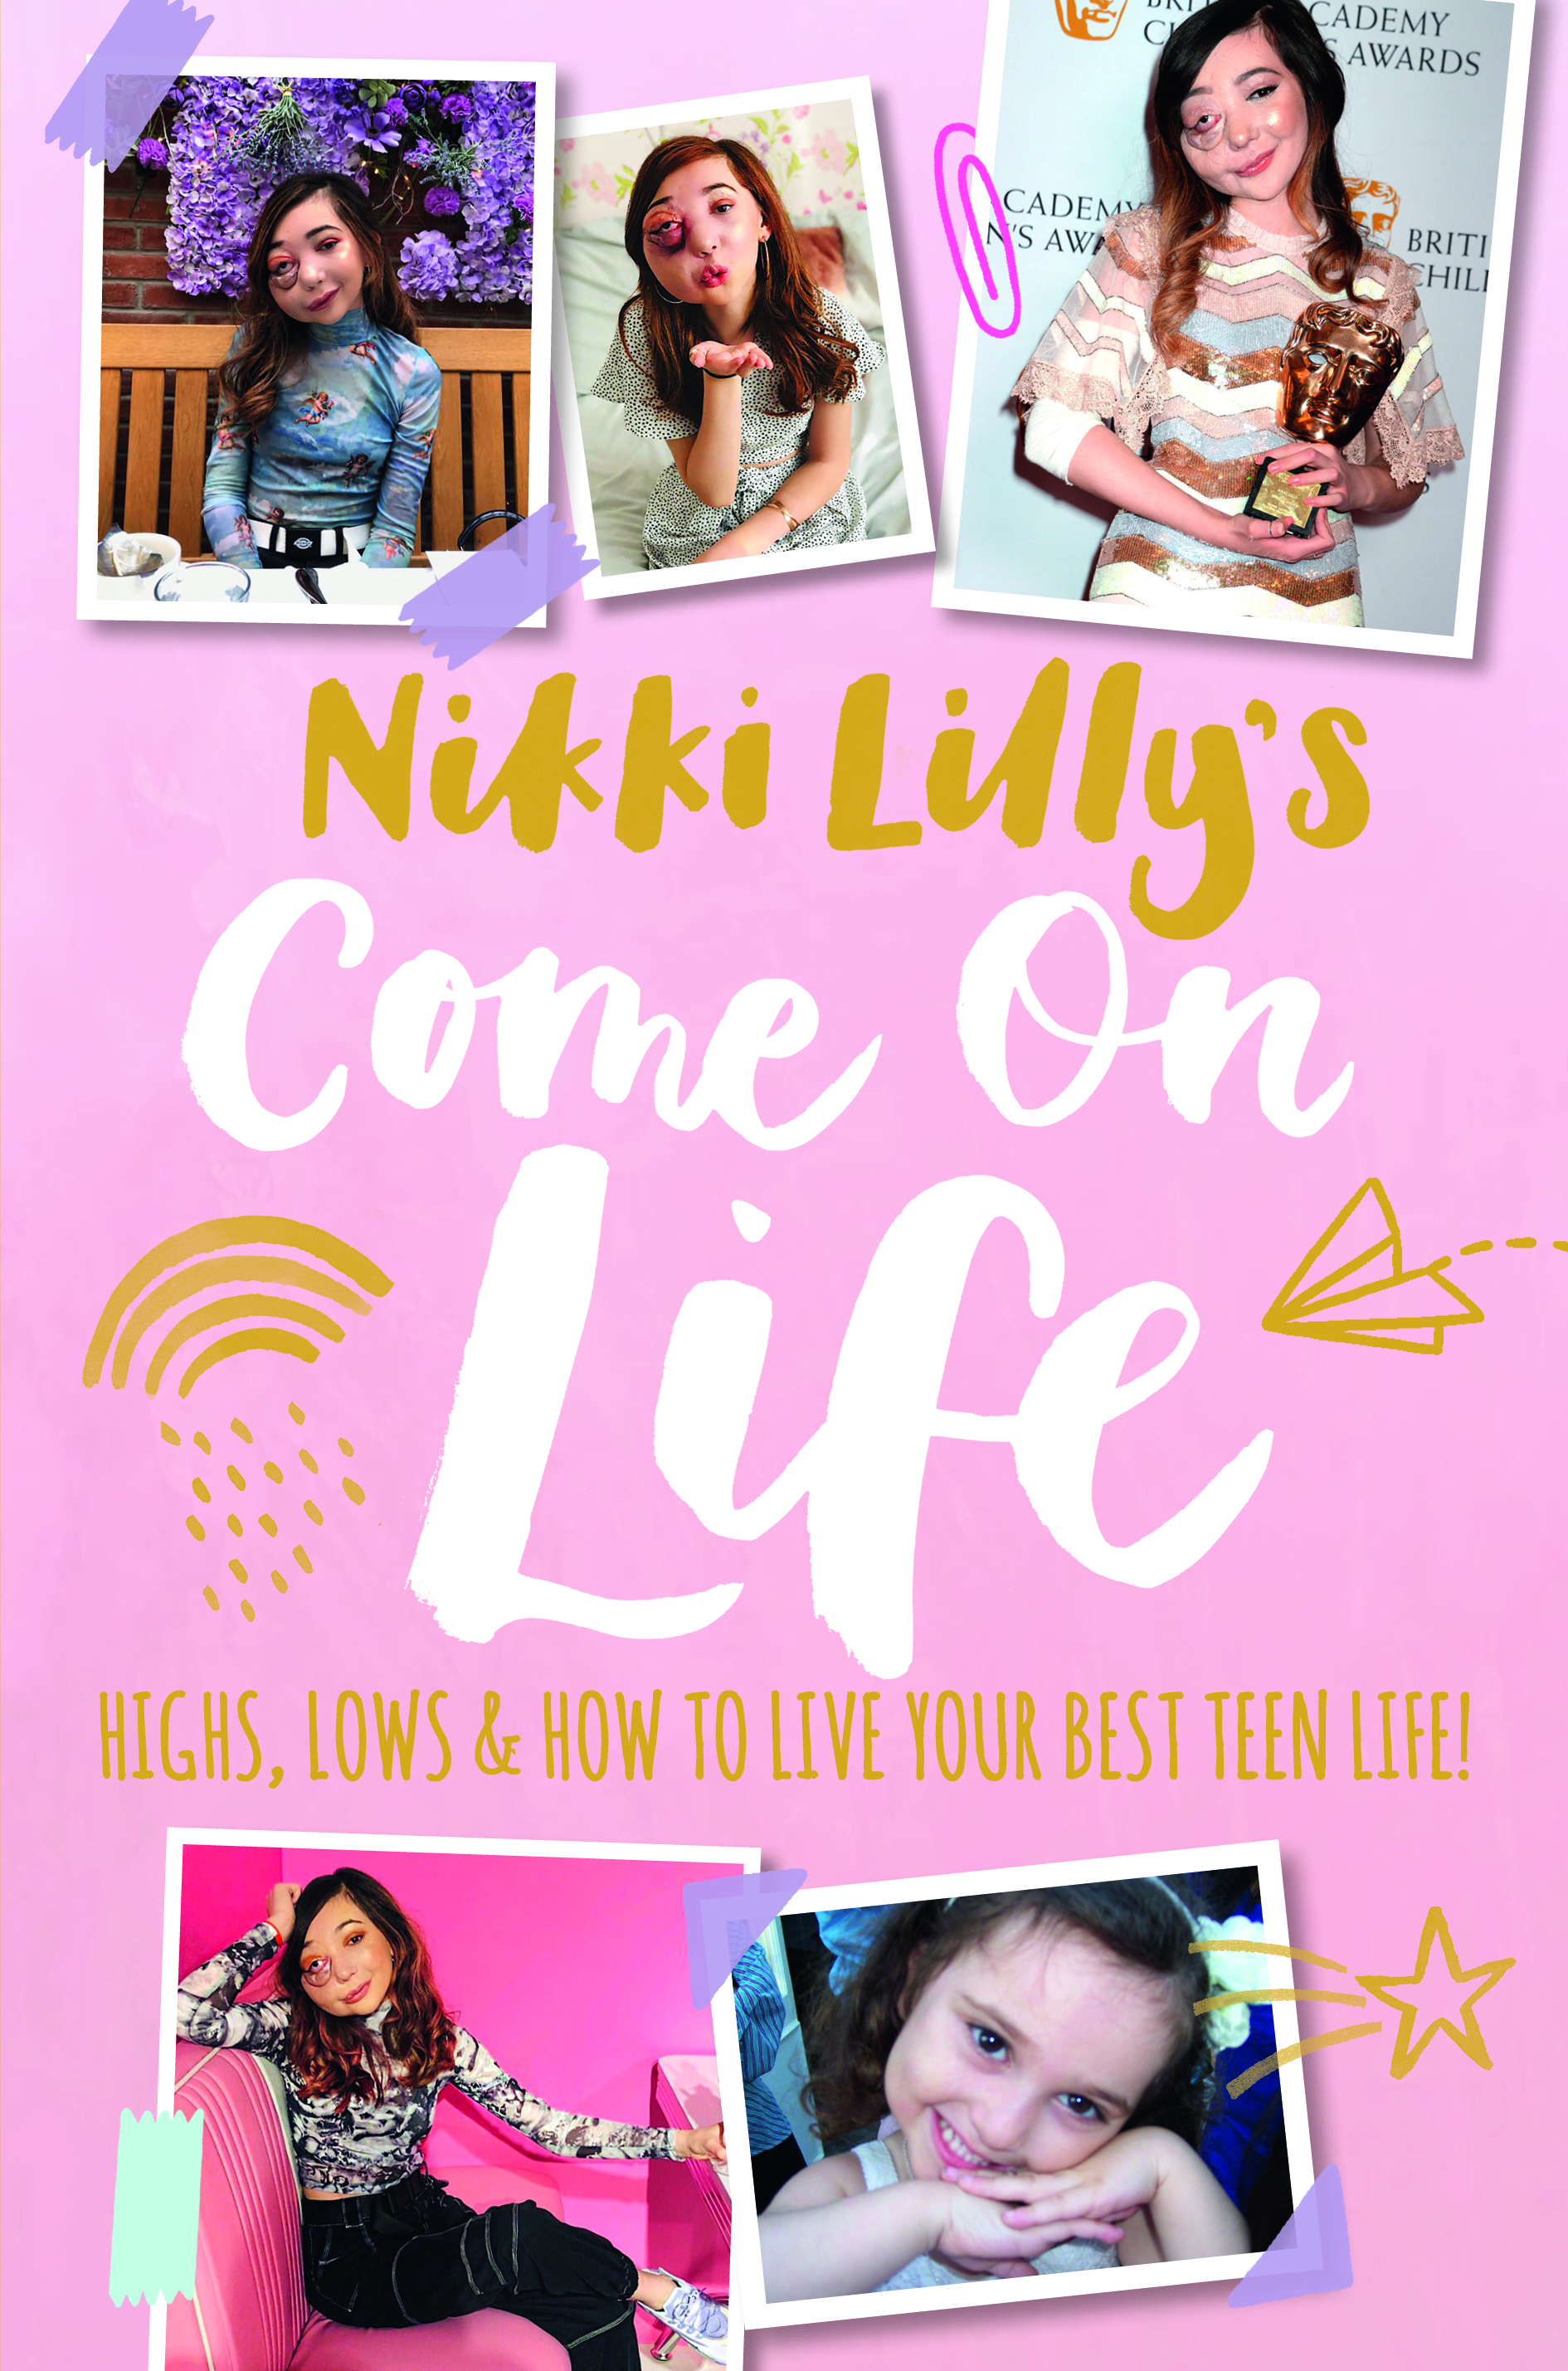 Nikki-Lilly-s-Come-on-Life-Highs-Lows-and-How-to-Live-Your-Best-Teen-Life